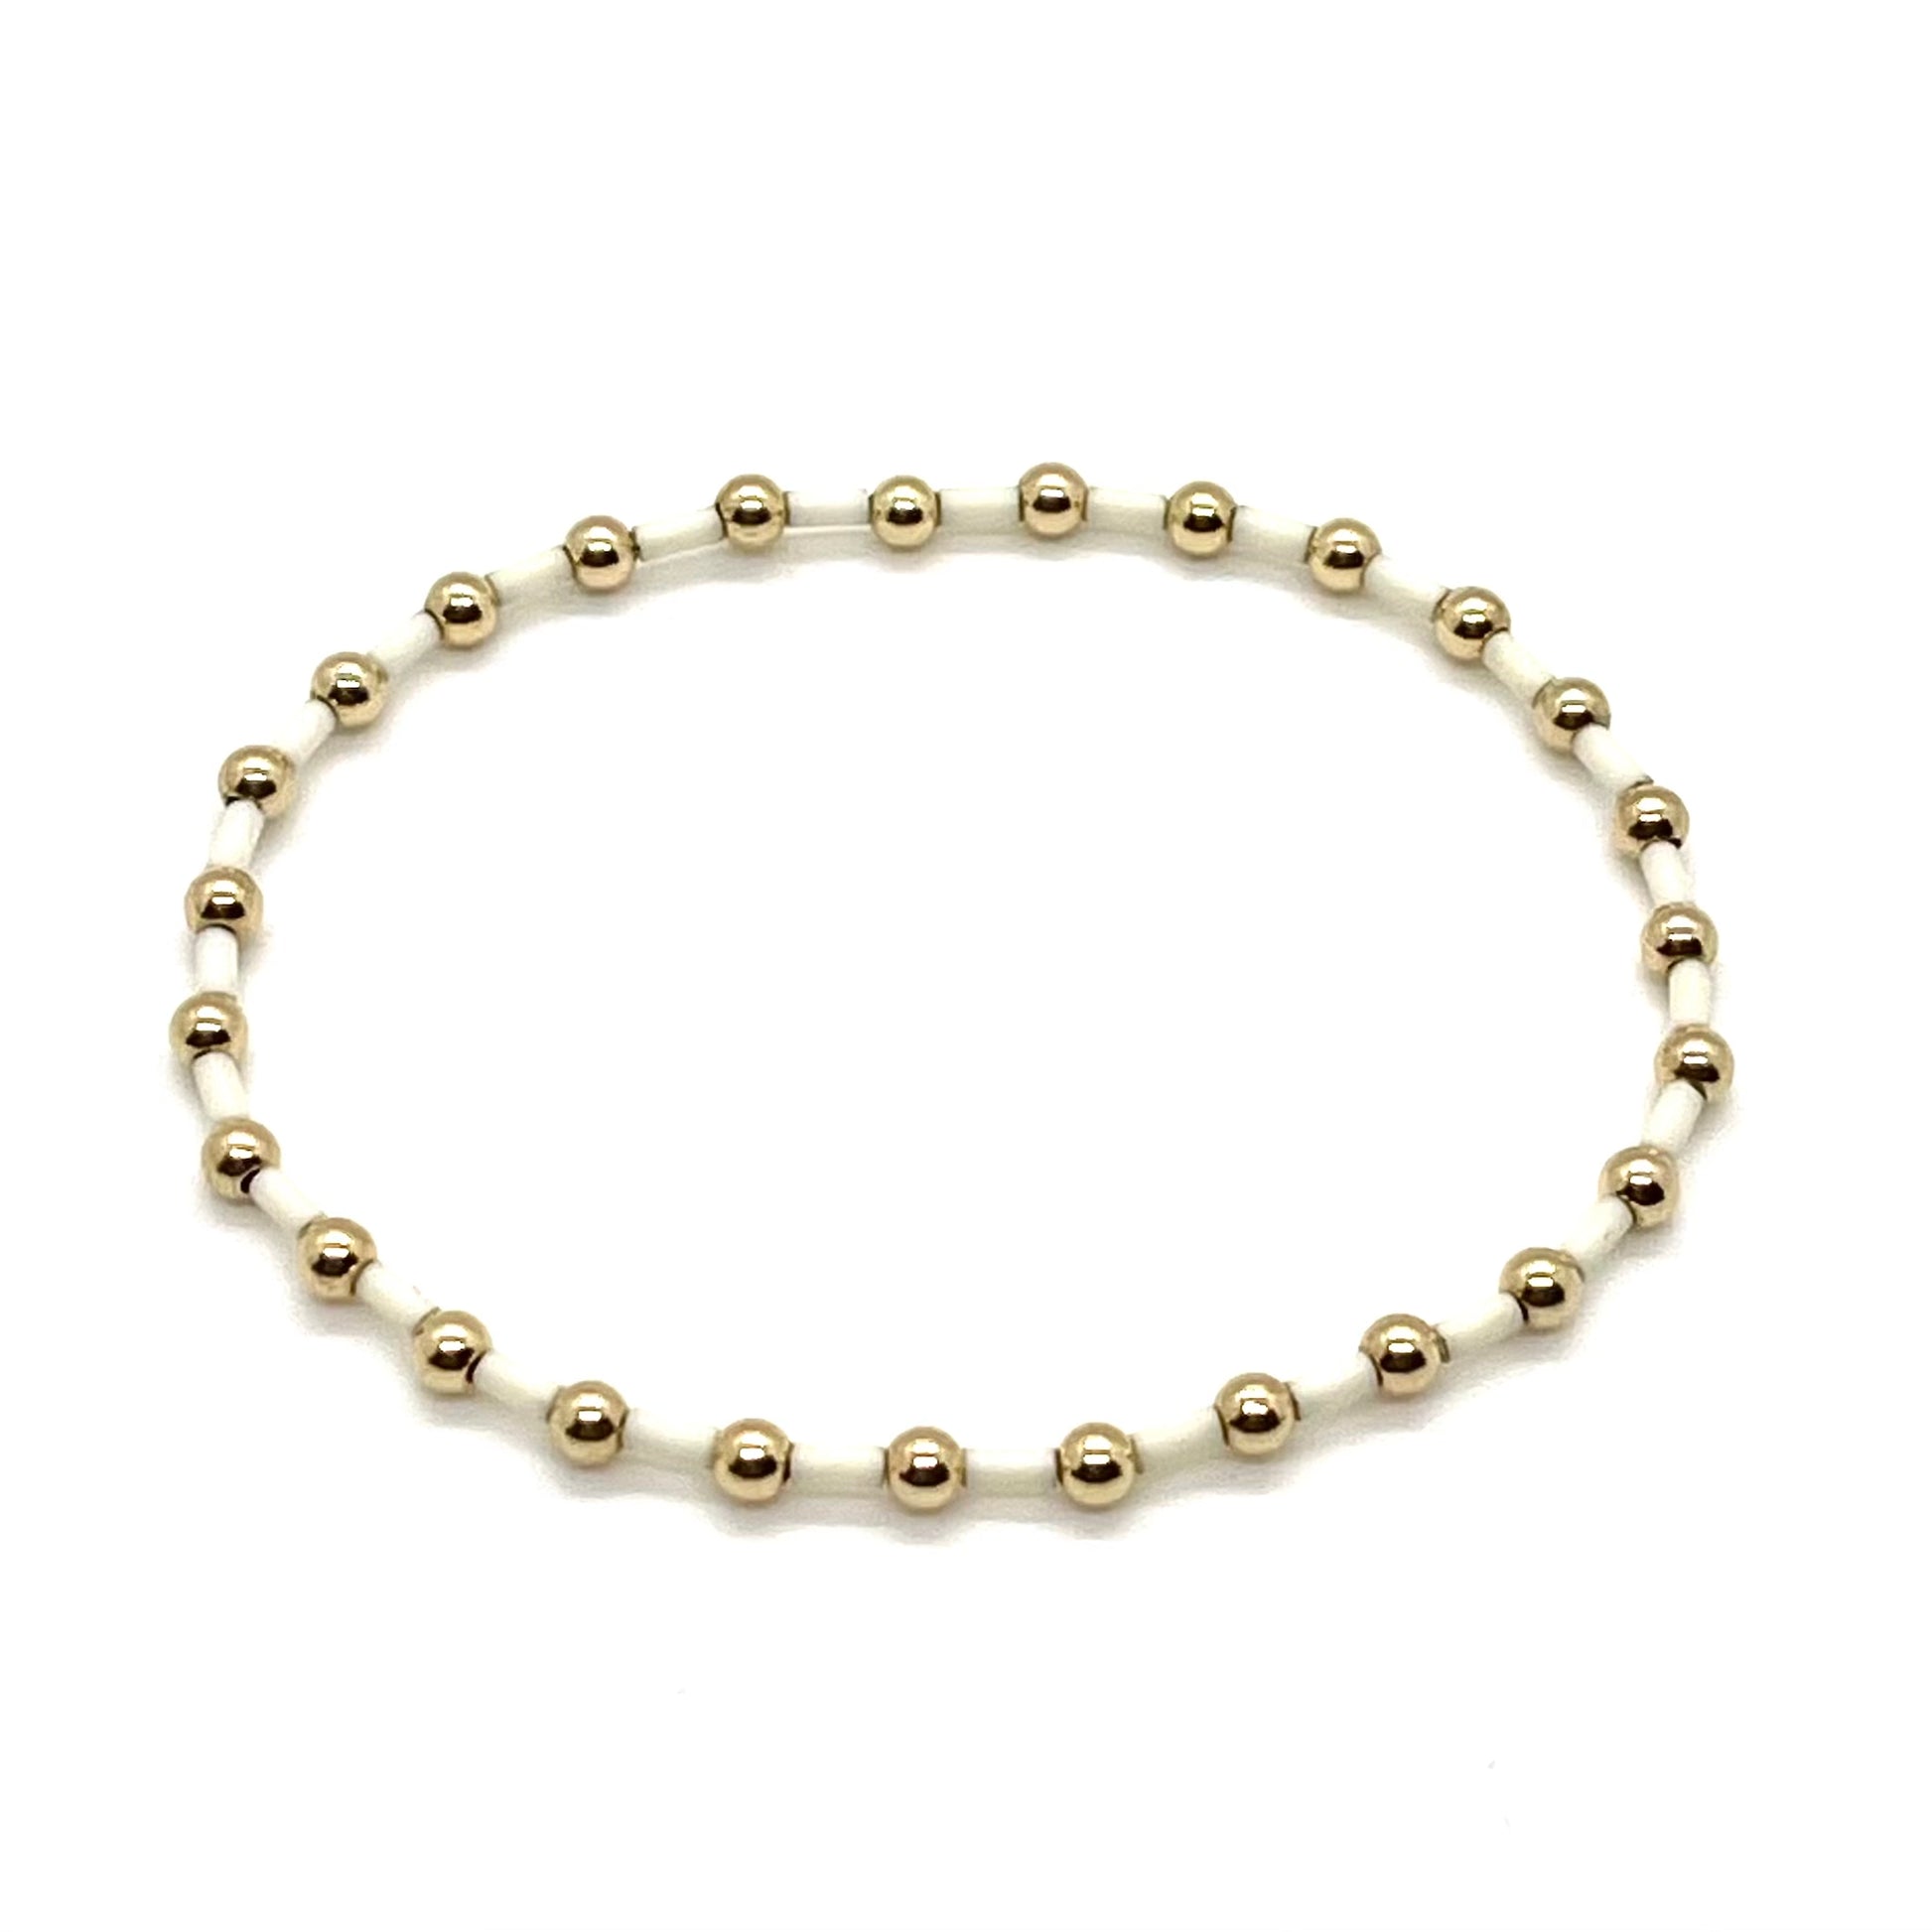 Gold and ivory women's beaded stretch bracelet.